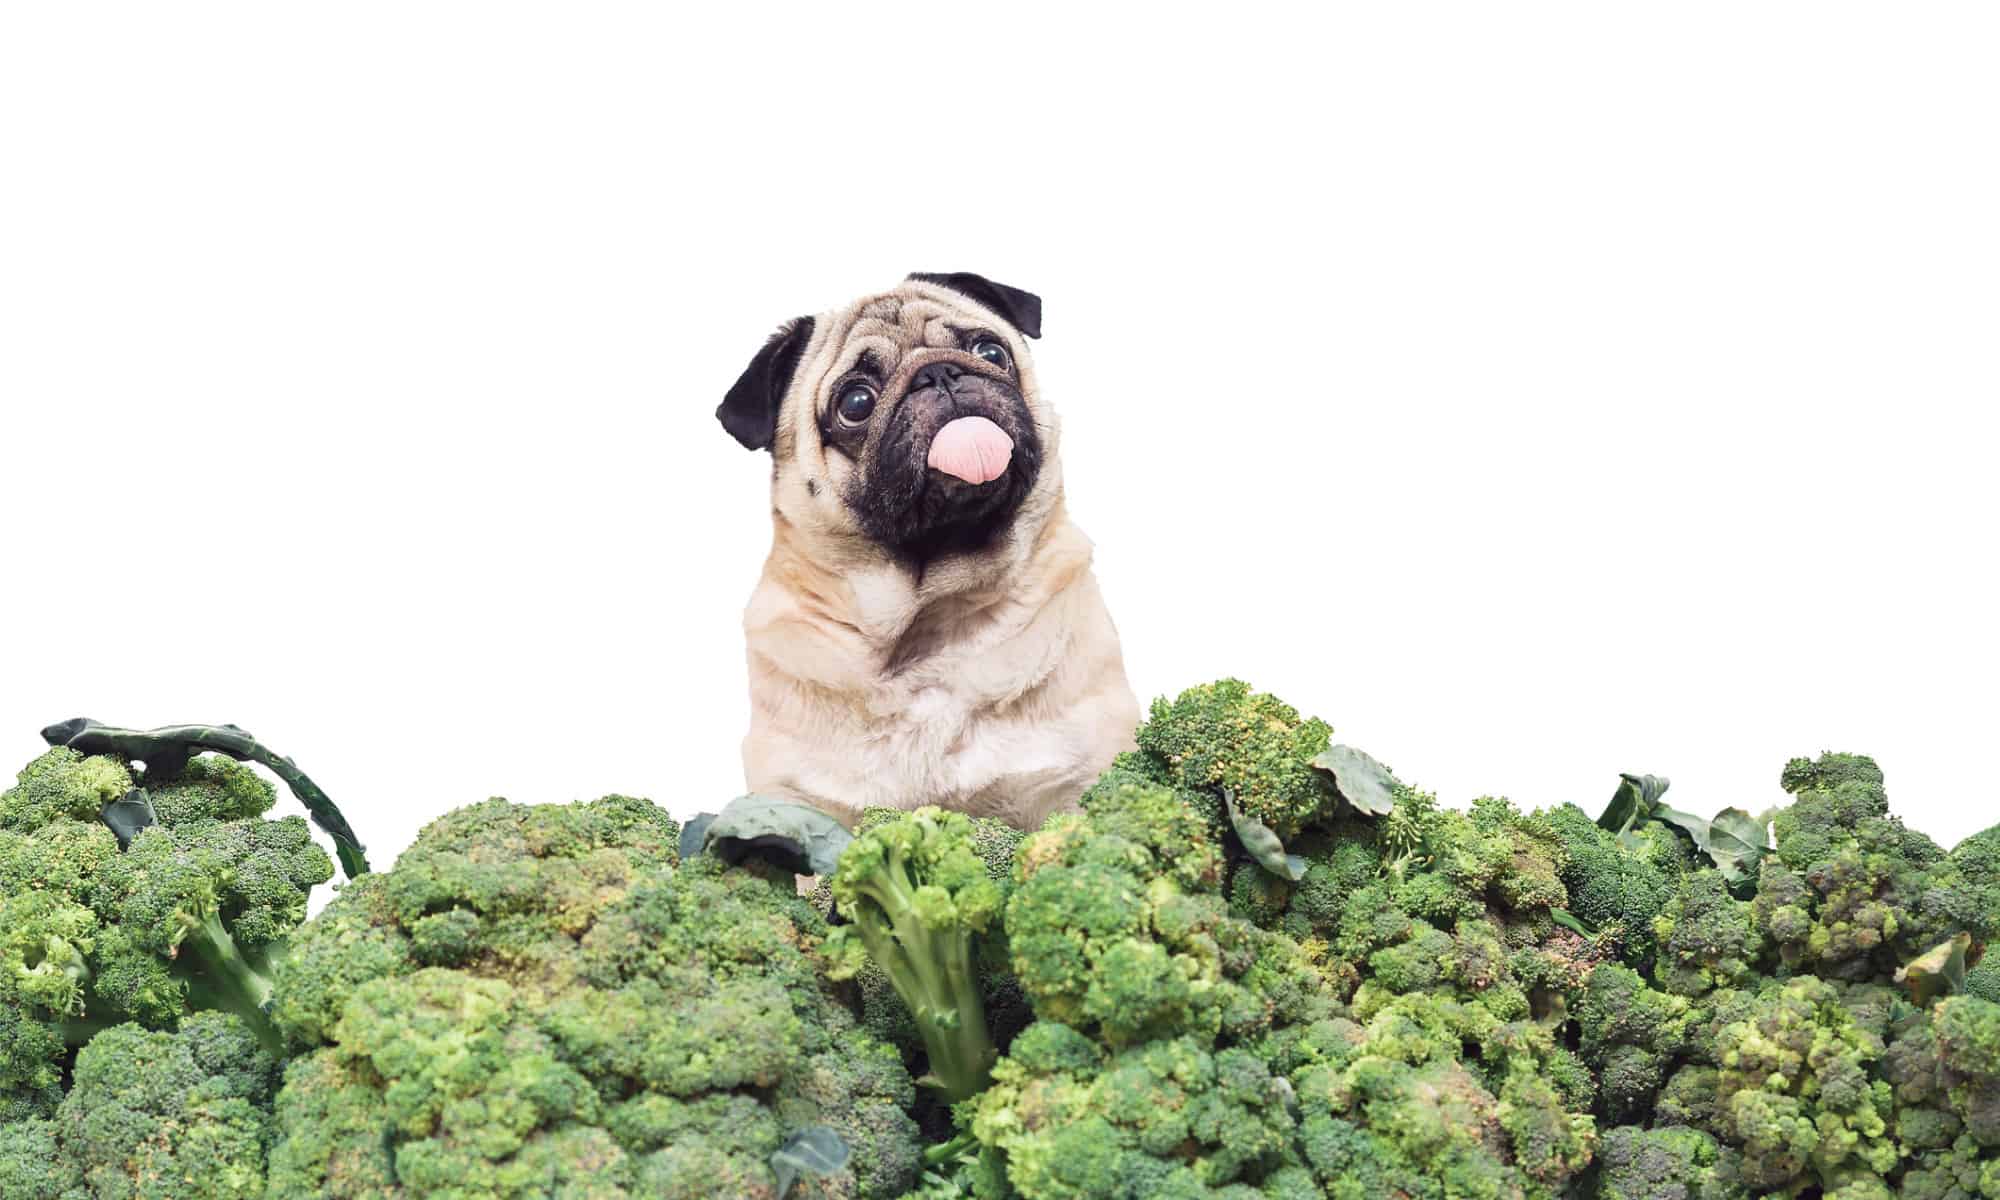 are dogs allowed broccoli